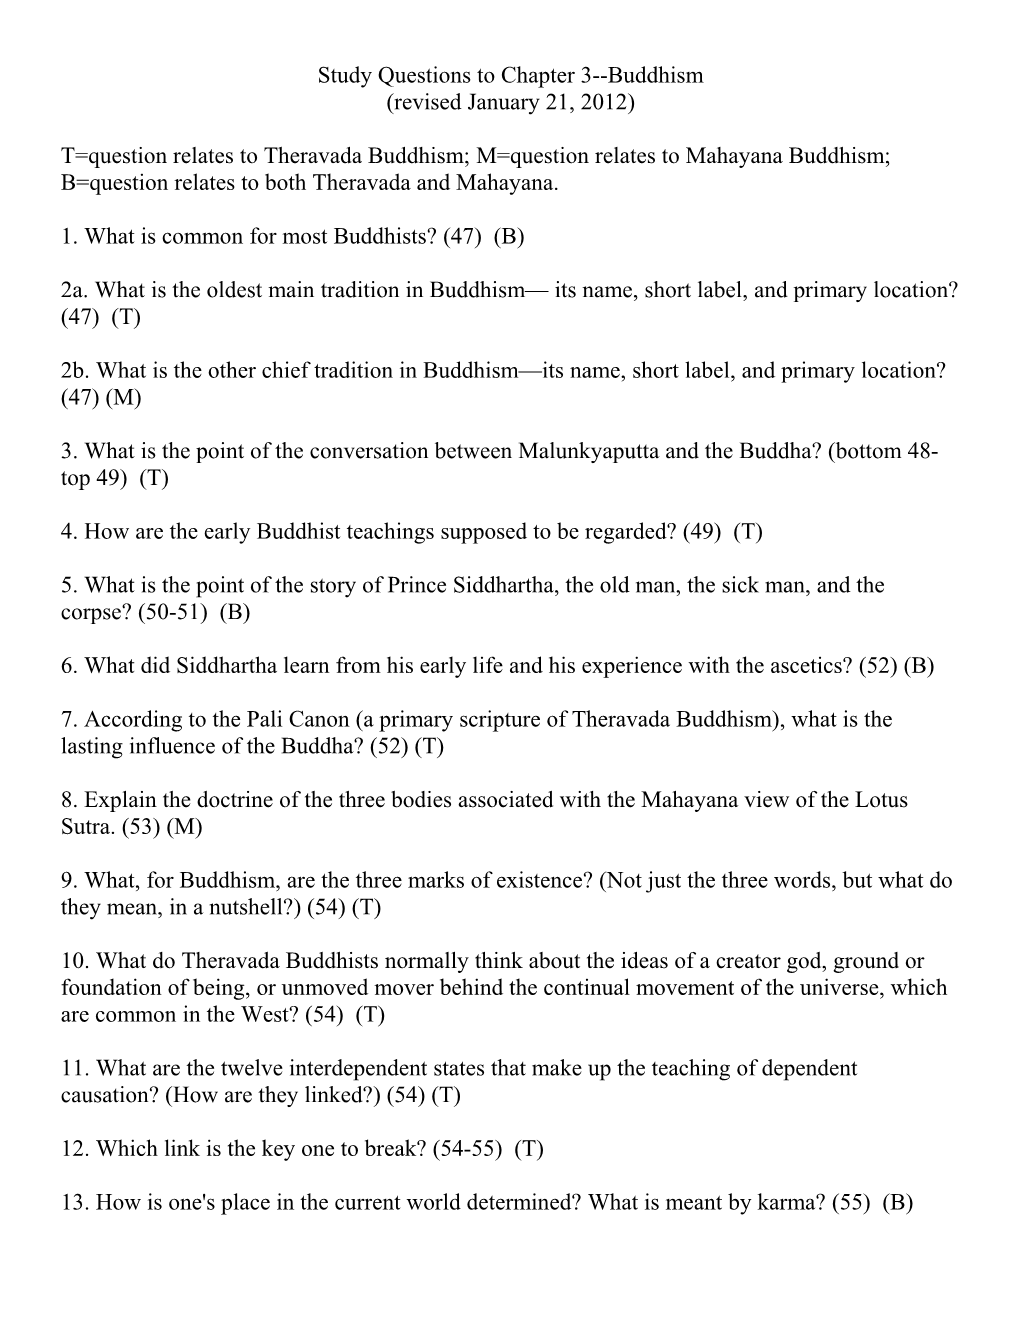 Study Questions for Ten Theories, Chapter 3